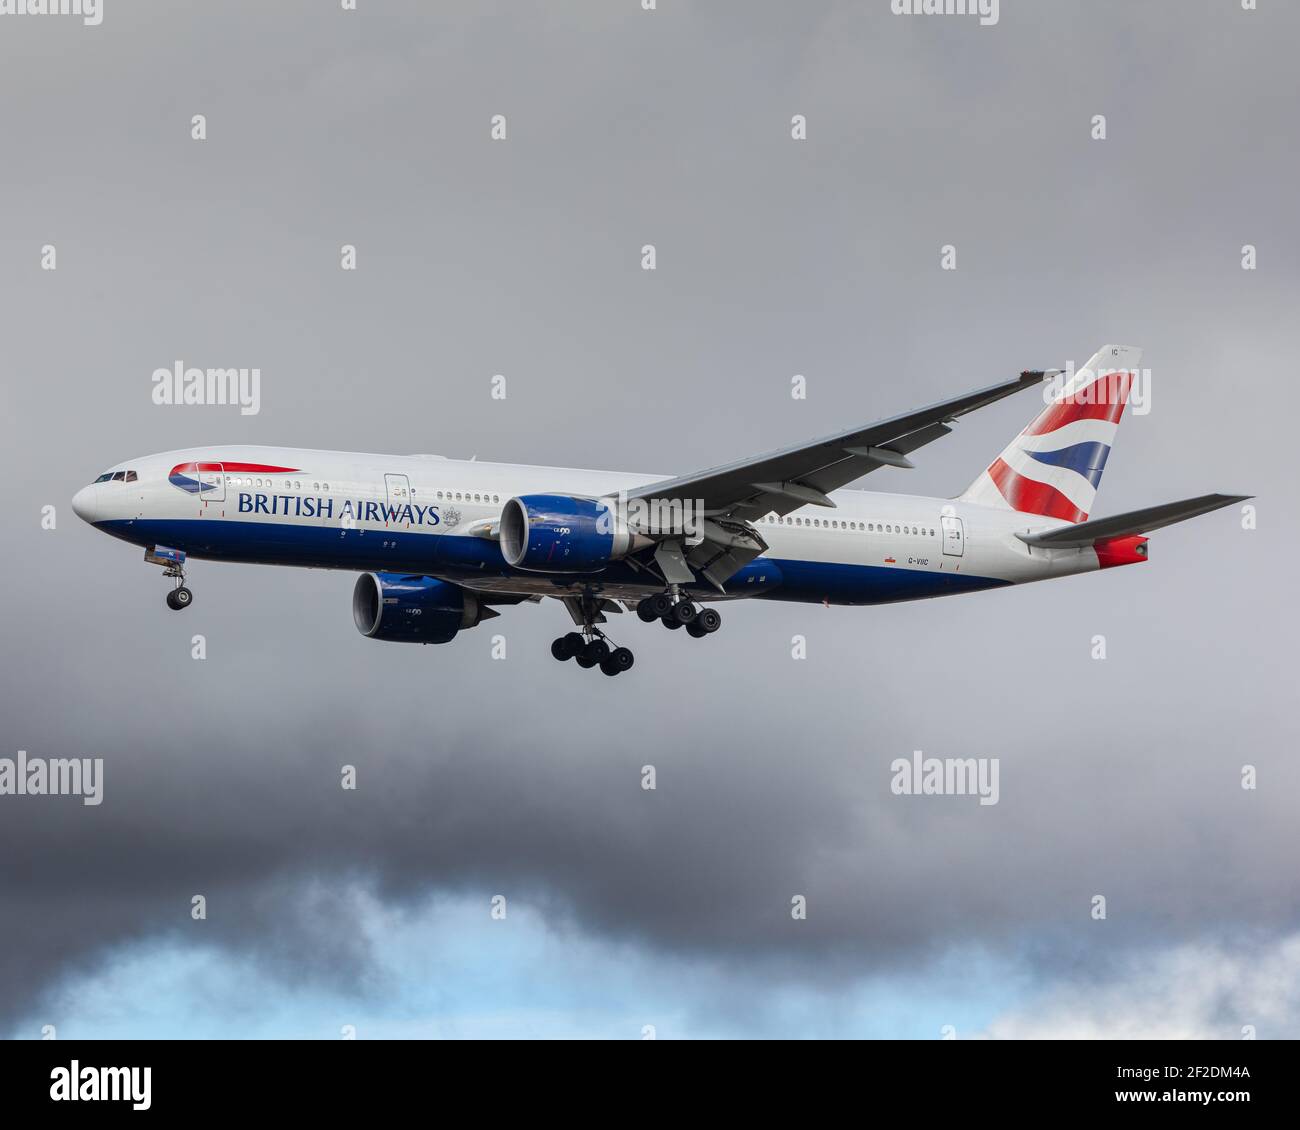 London, Heathrow Airport - March 2020: British Airways, Boeing 777, registration G-VIIC  Landing on runway 27L on a grey and stormy day. image Abdul N Stock Photo